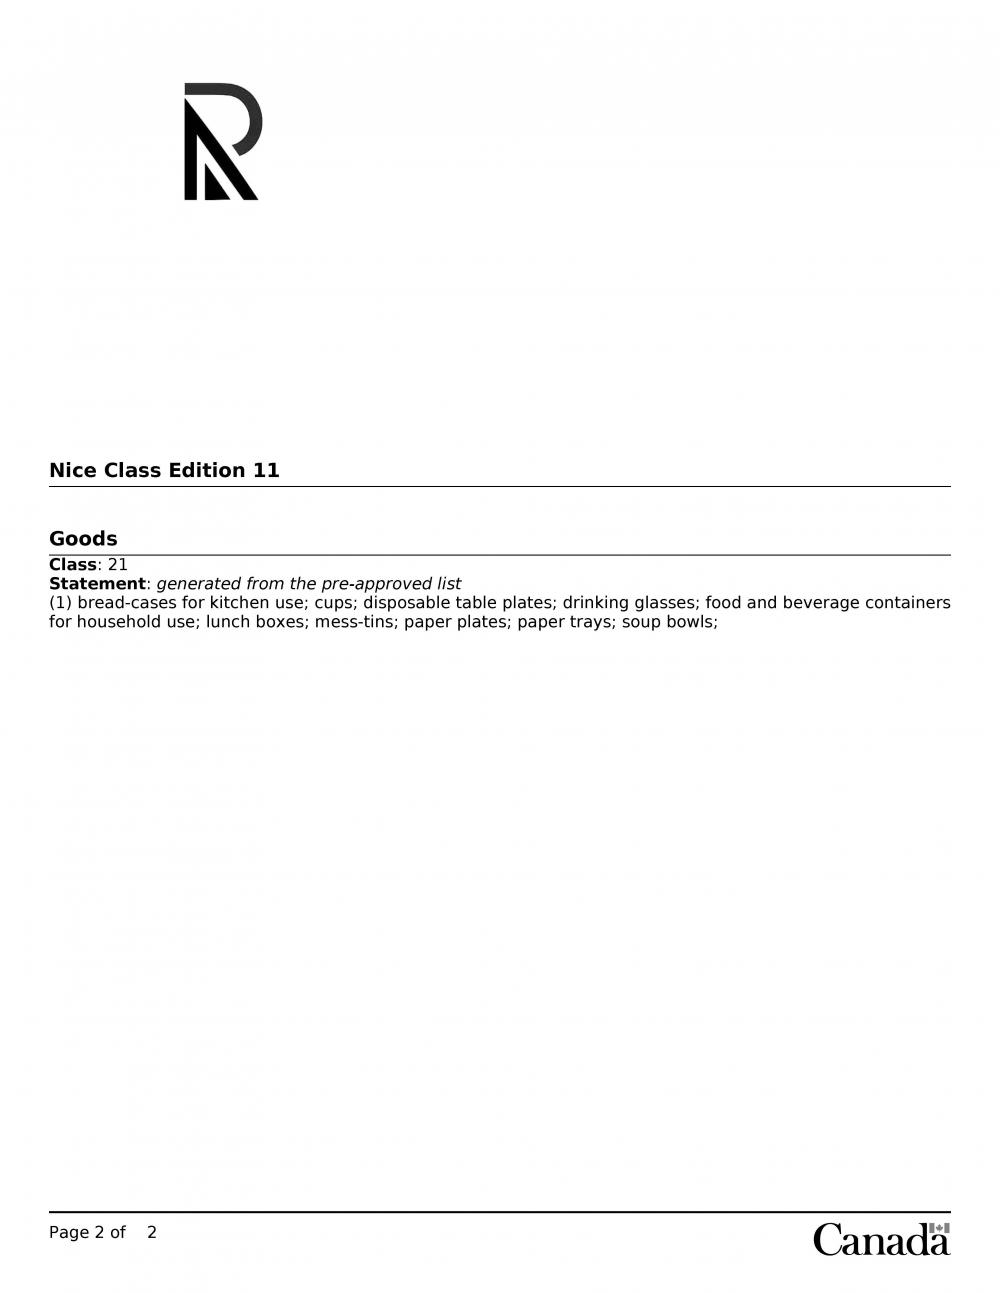 APPLICATION FOR THE REGISTRATION OF A TRADEMARK- CANADA-